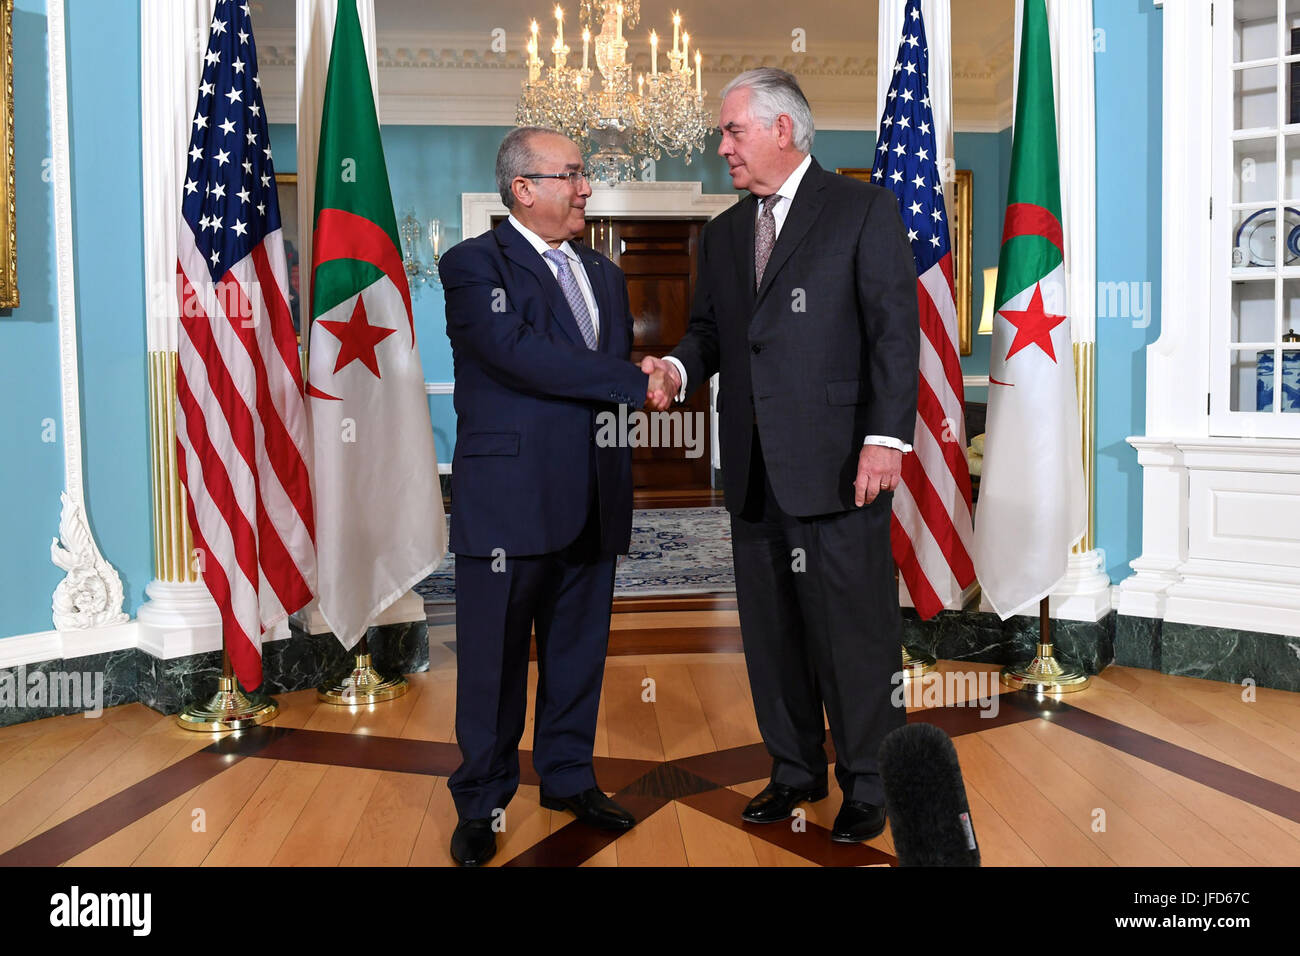 U.S. Secretary of State Rex Tillerson speaks with Algerian Foreign Minister Ramtane Lamamra before their bilateral meeting at the U.S. Department of State in Washington, D.C., on May 17, 2017. Stock Photo